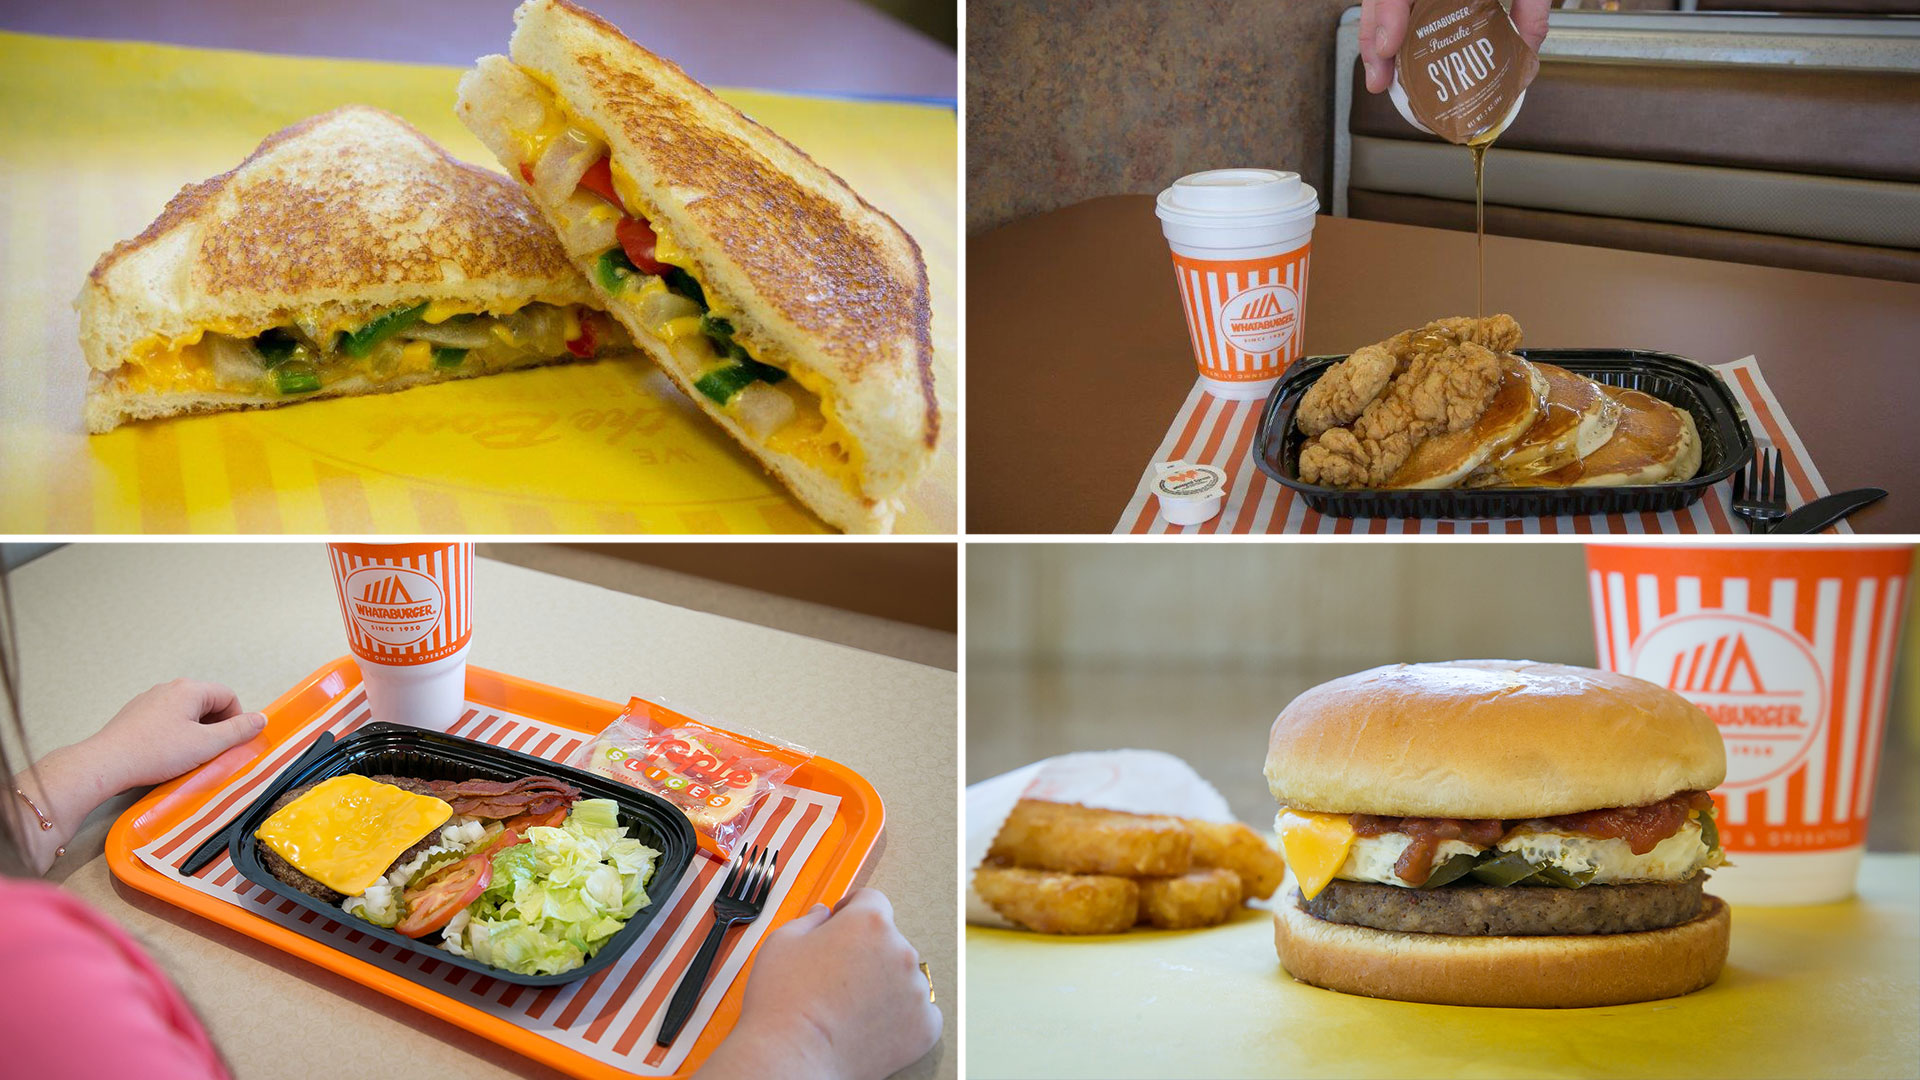 It's Here! Whataburger Reveals New Sauce--and Texans are Thrilled